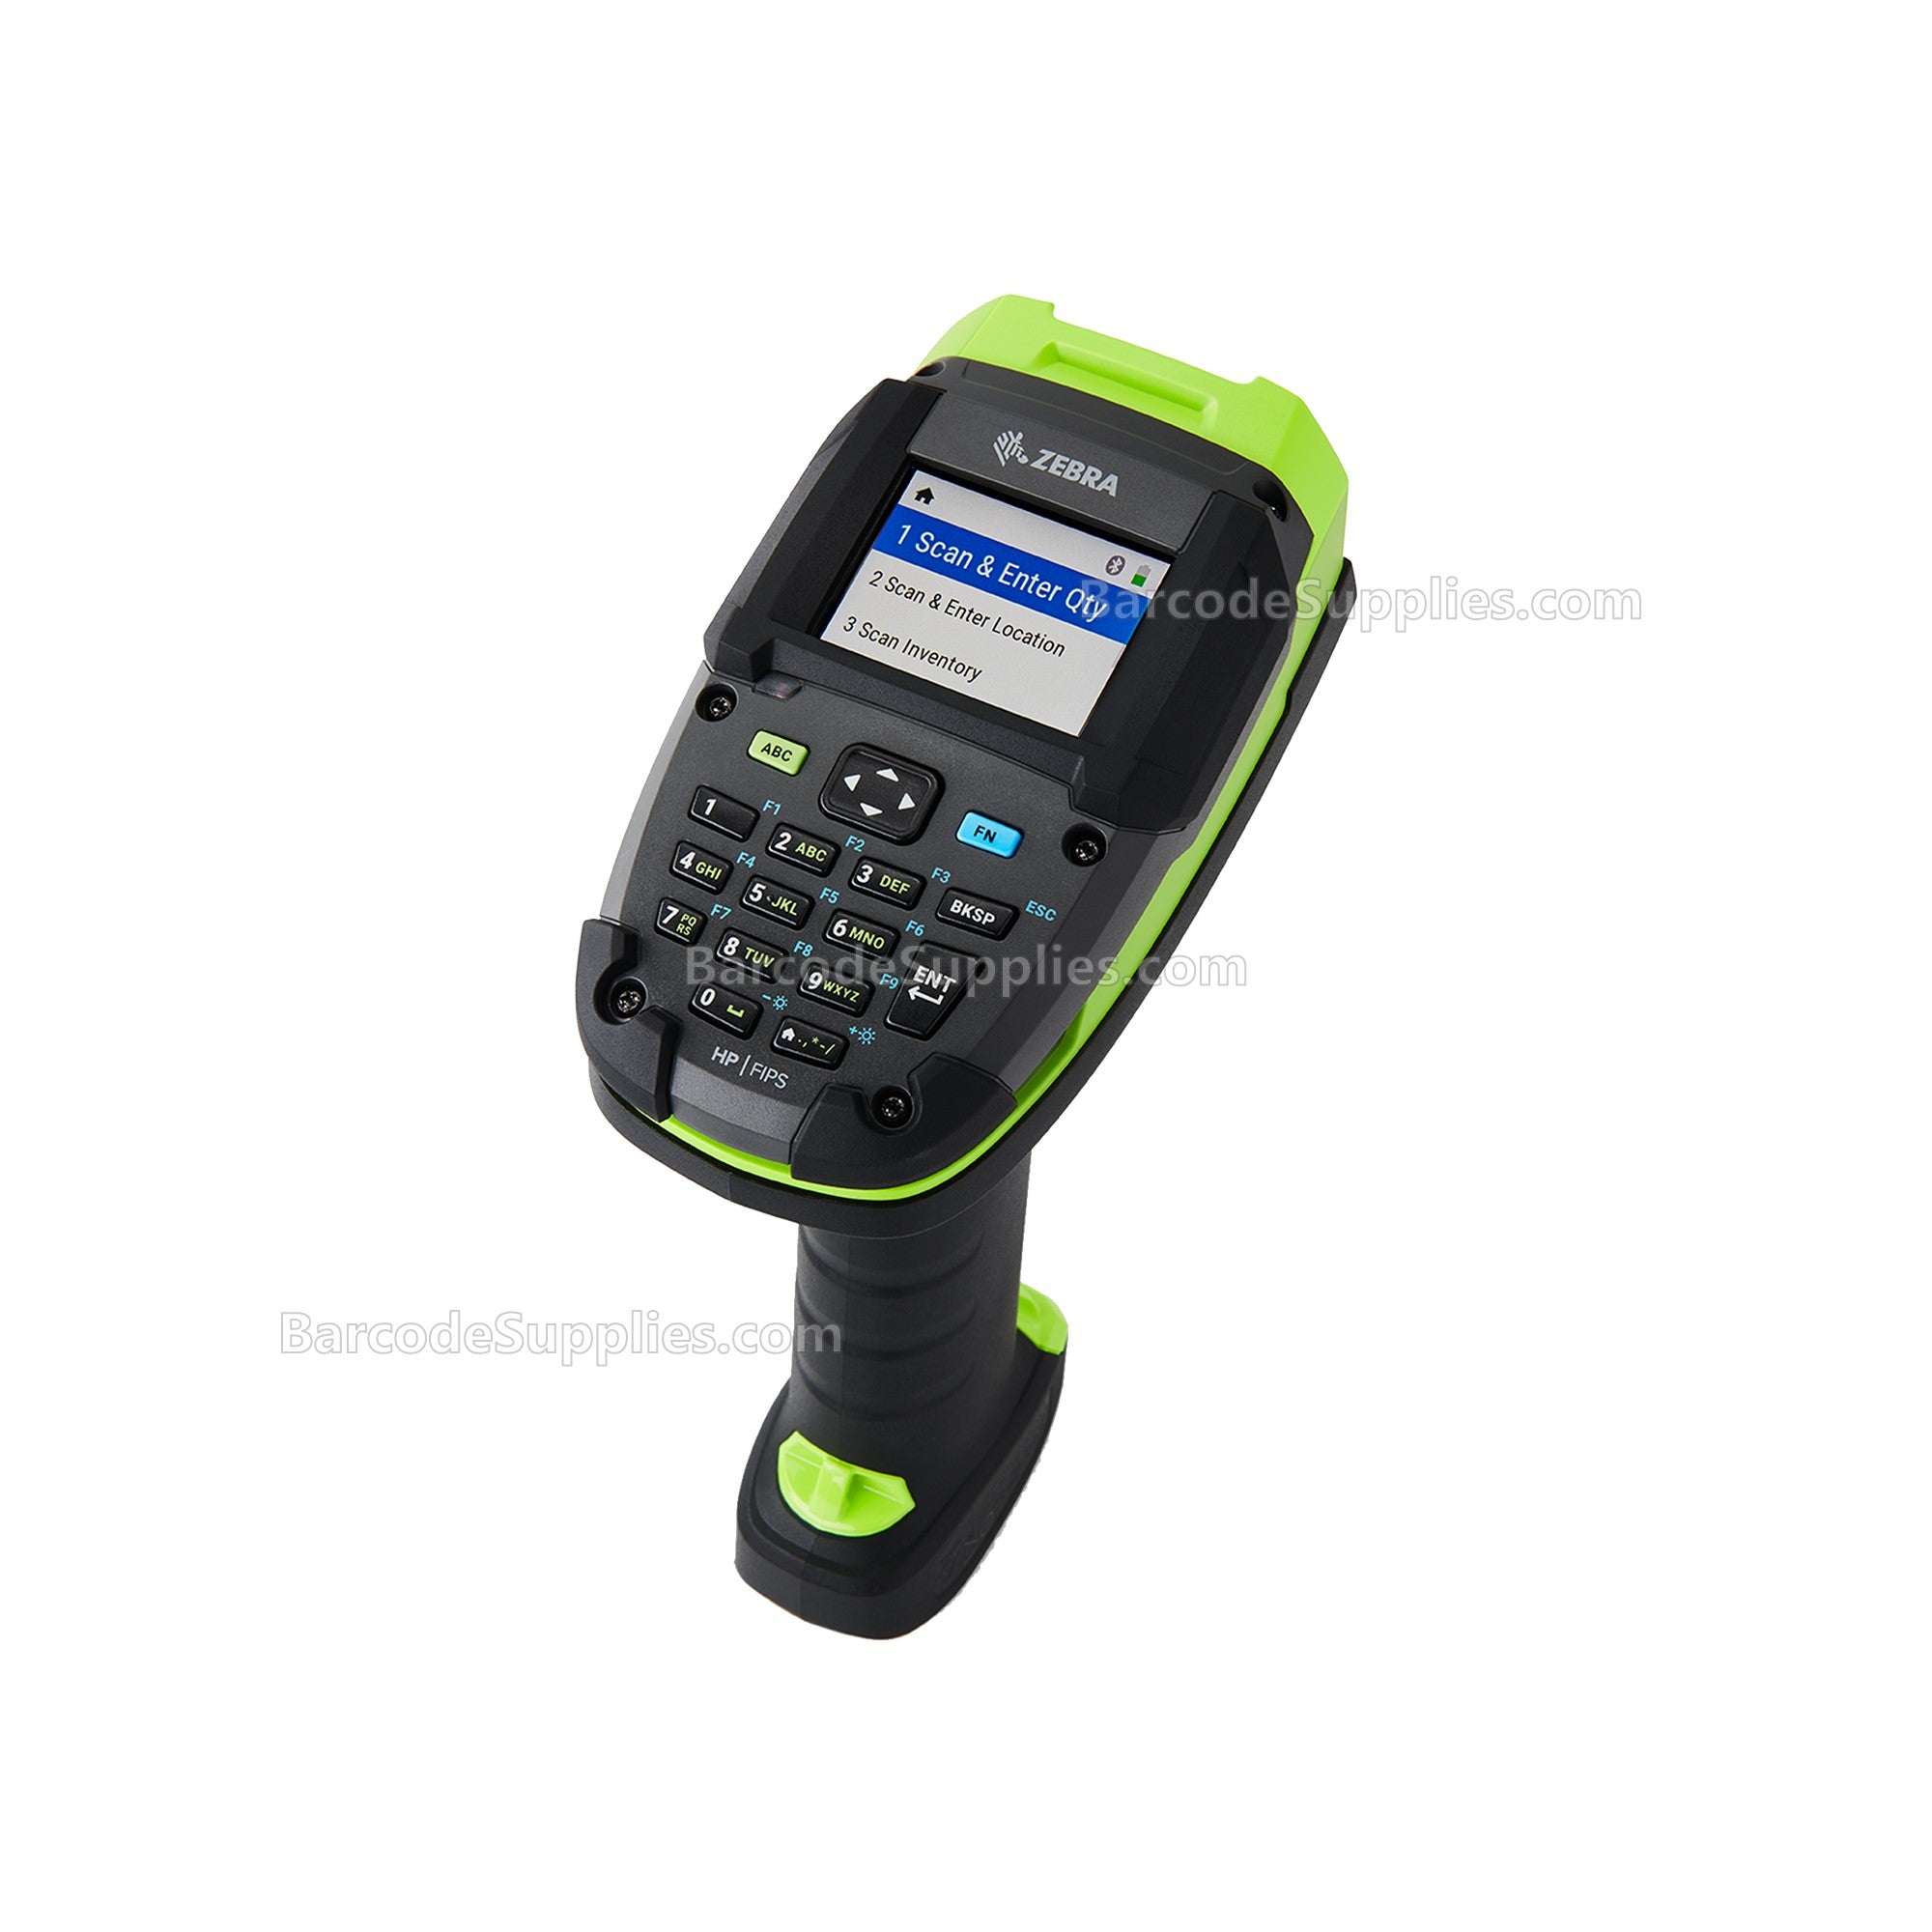 Zebra DS3678-HP RUGGED FIPS Vibration, Keypad and Display Standard Cradle KIT: DS3678-HP2F003VKWW Scanner, CBA-U42-S07PAR Shielded USB Cable, STB3678-C100F3WW Cradle, PWR-BGA12V50W0WW P/S, CBL-DC-451A1-01 DC CORD, 23844-00-00R A/C CORD